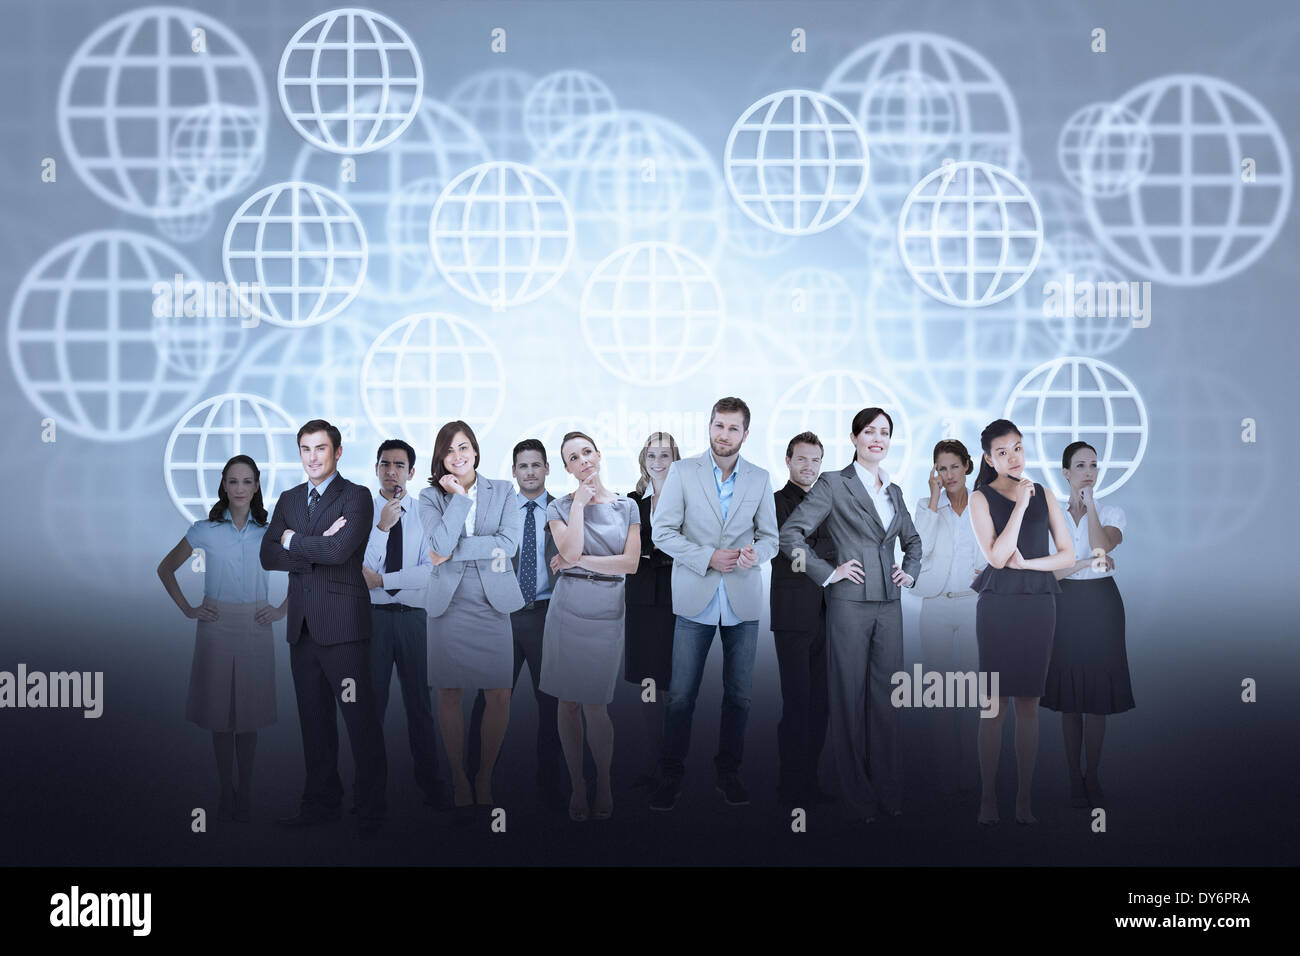 Business team against sphere background Stock Photo